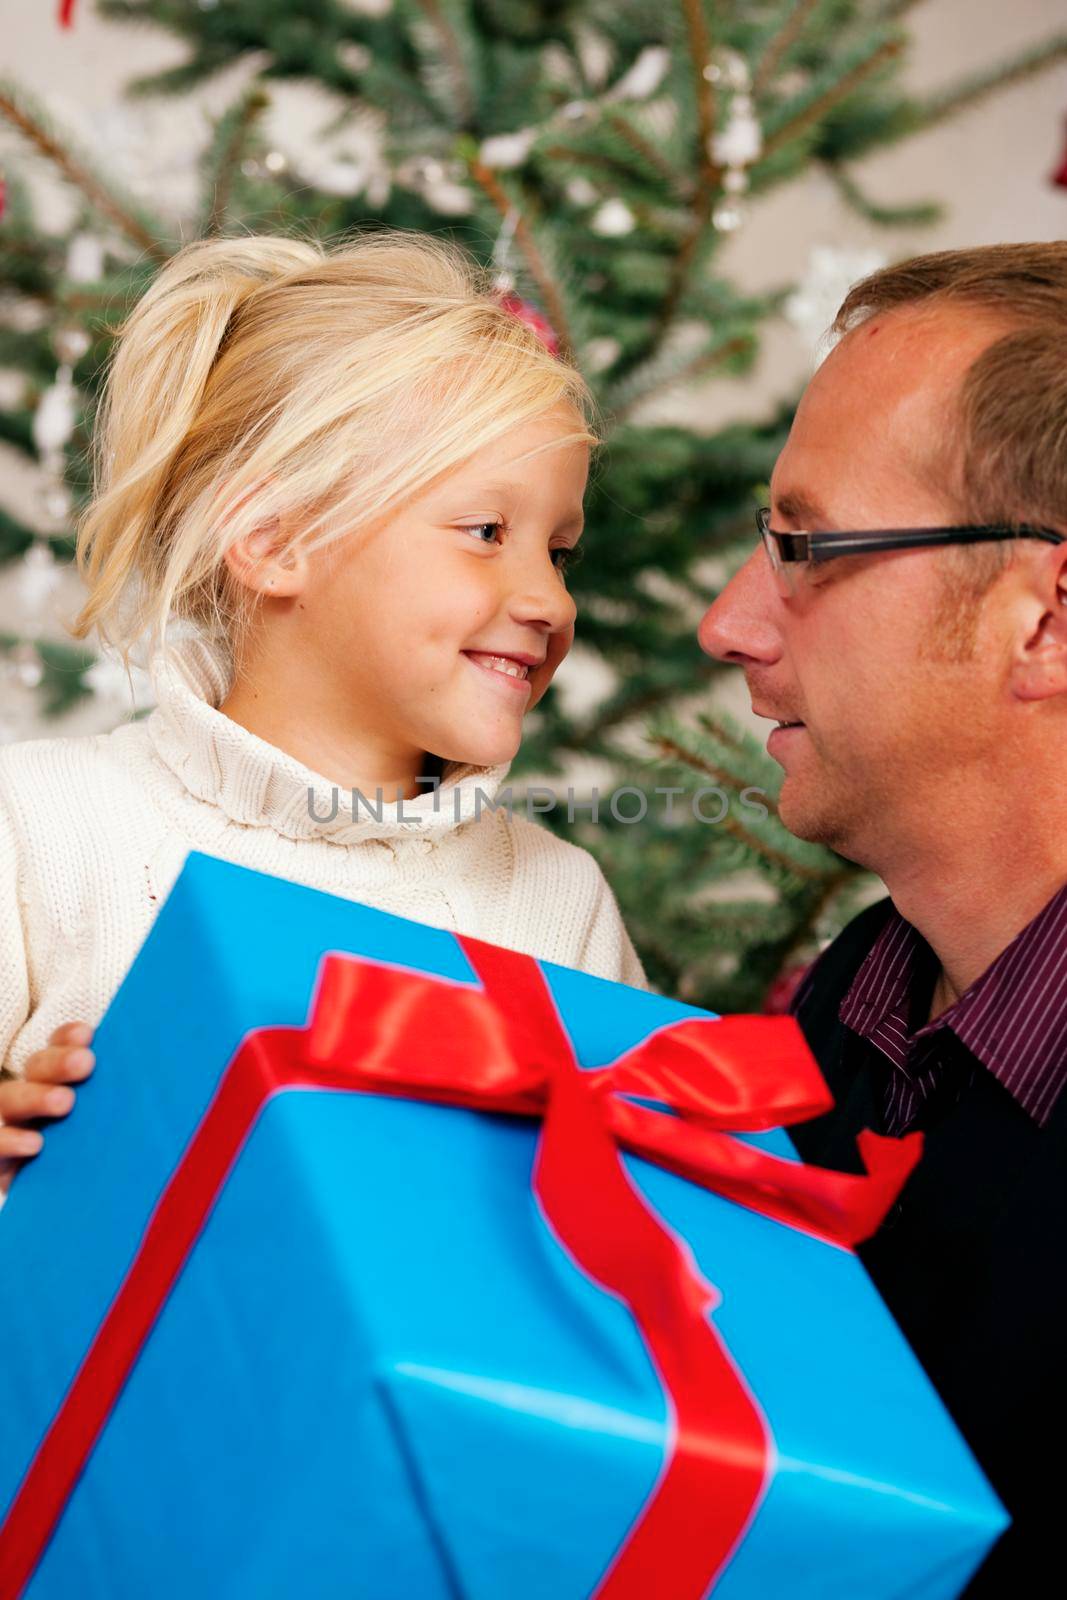 Christmas - child receiving a gift by Kzenon